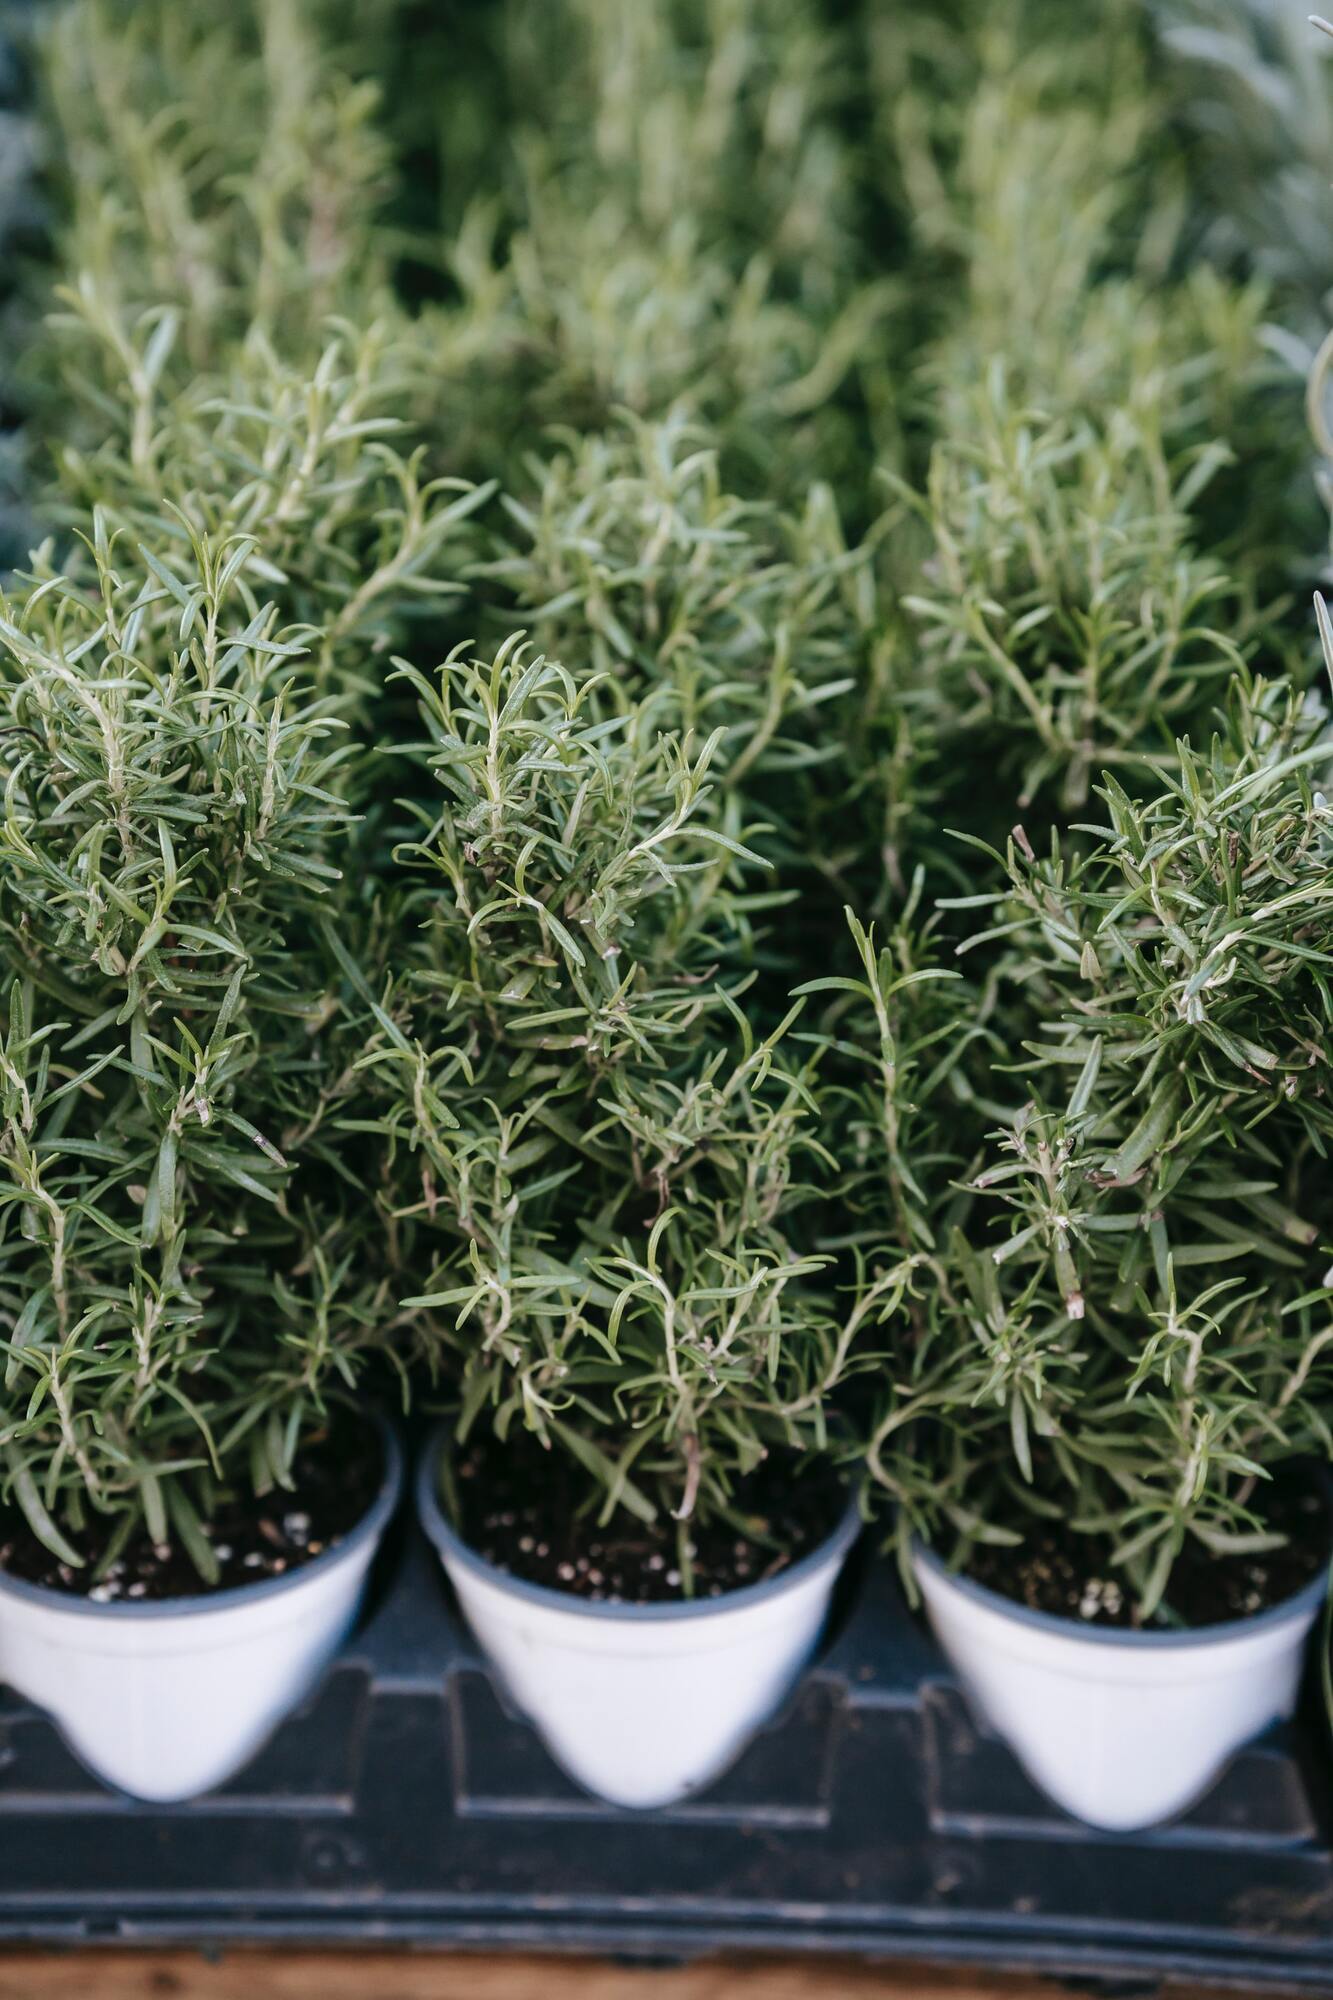 A sprig of rosemary makes a dish special